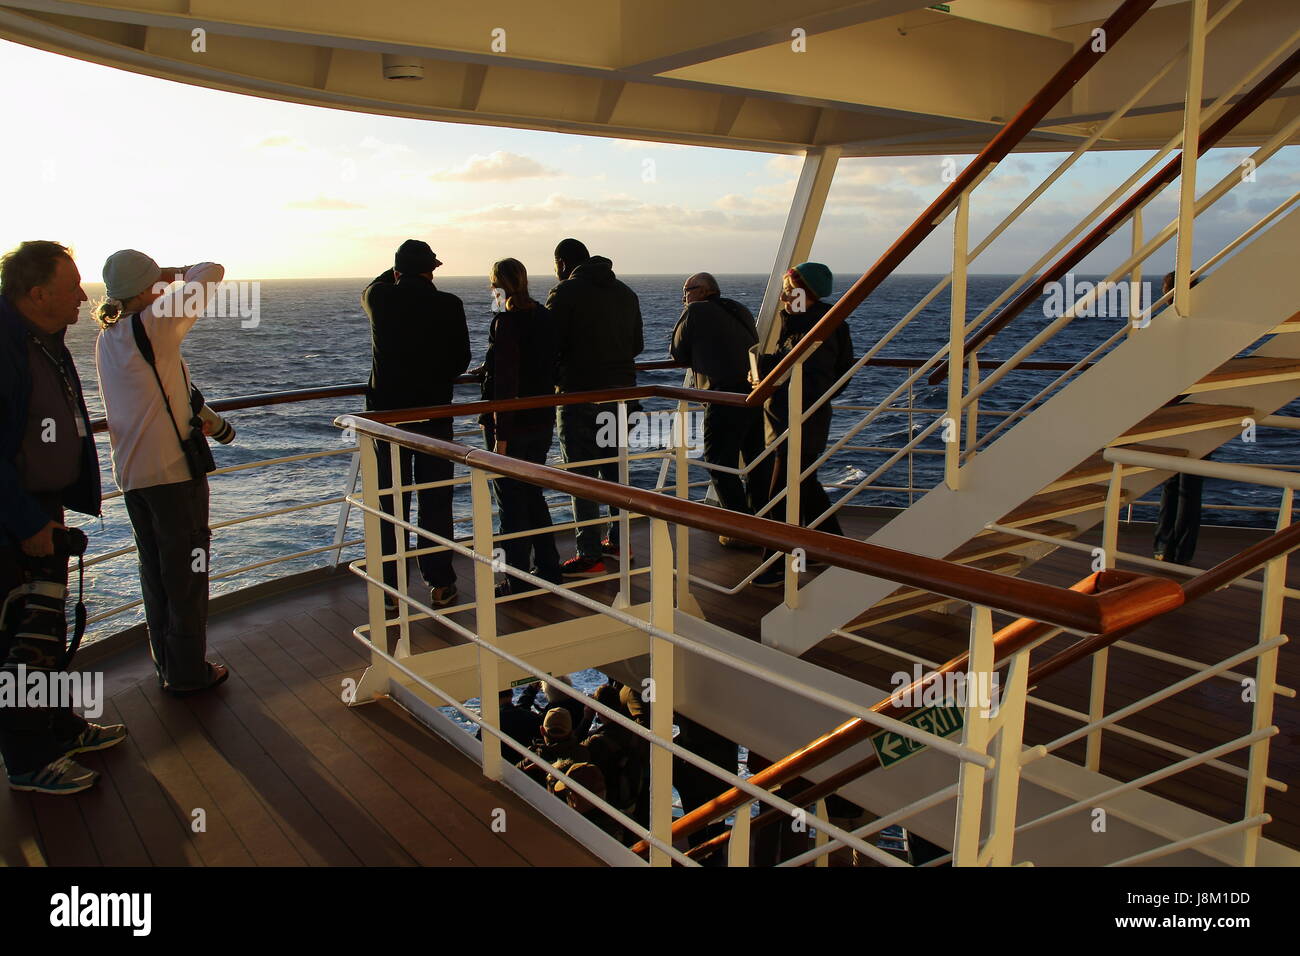 Cape Town South Africa - passengers on the aft deck of a cruise liner watch the departure from Table Bay Harbor Stock Photo